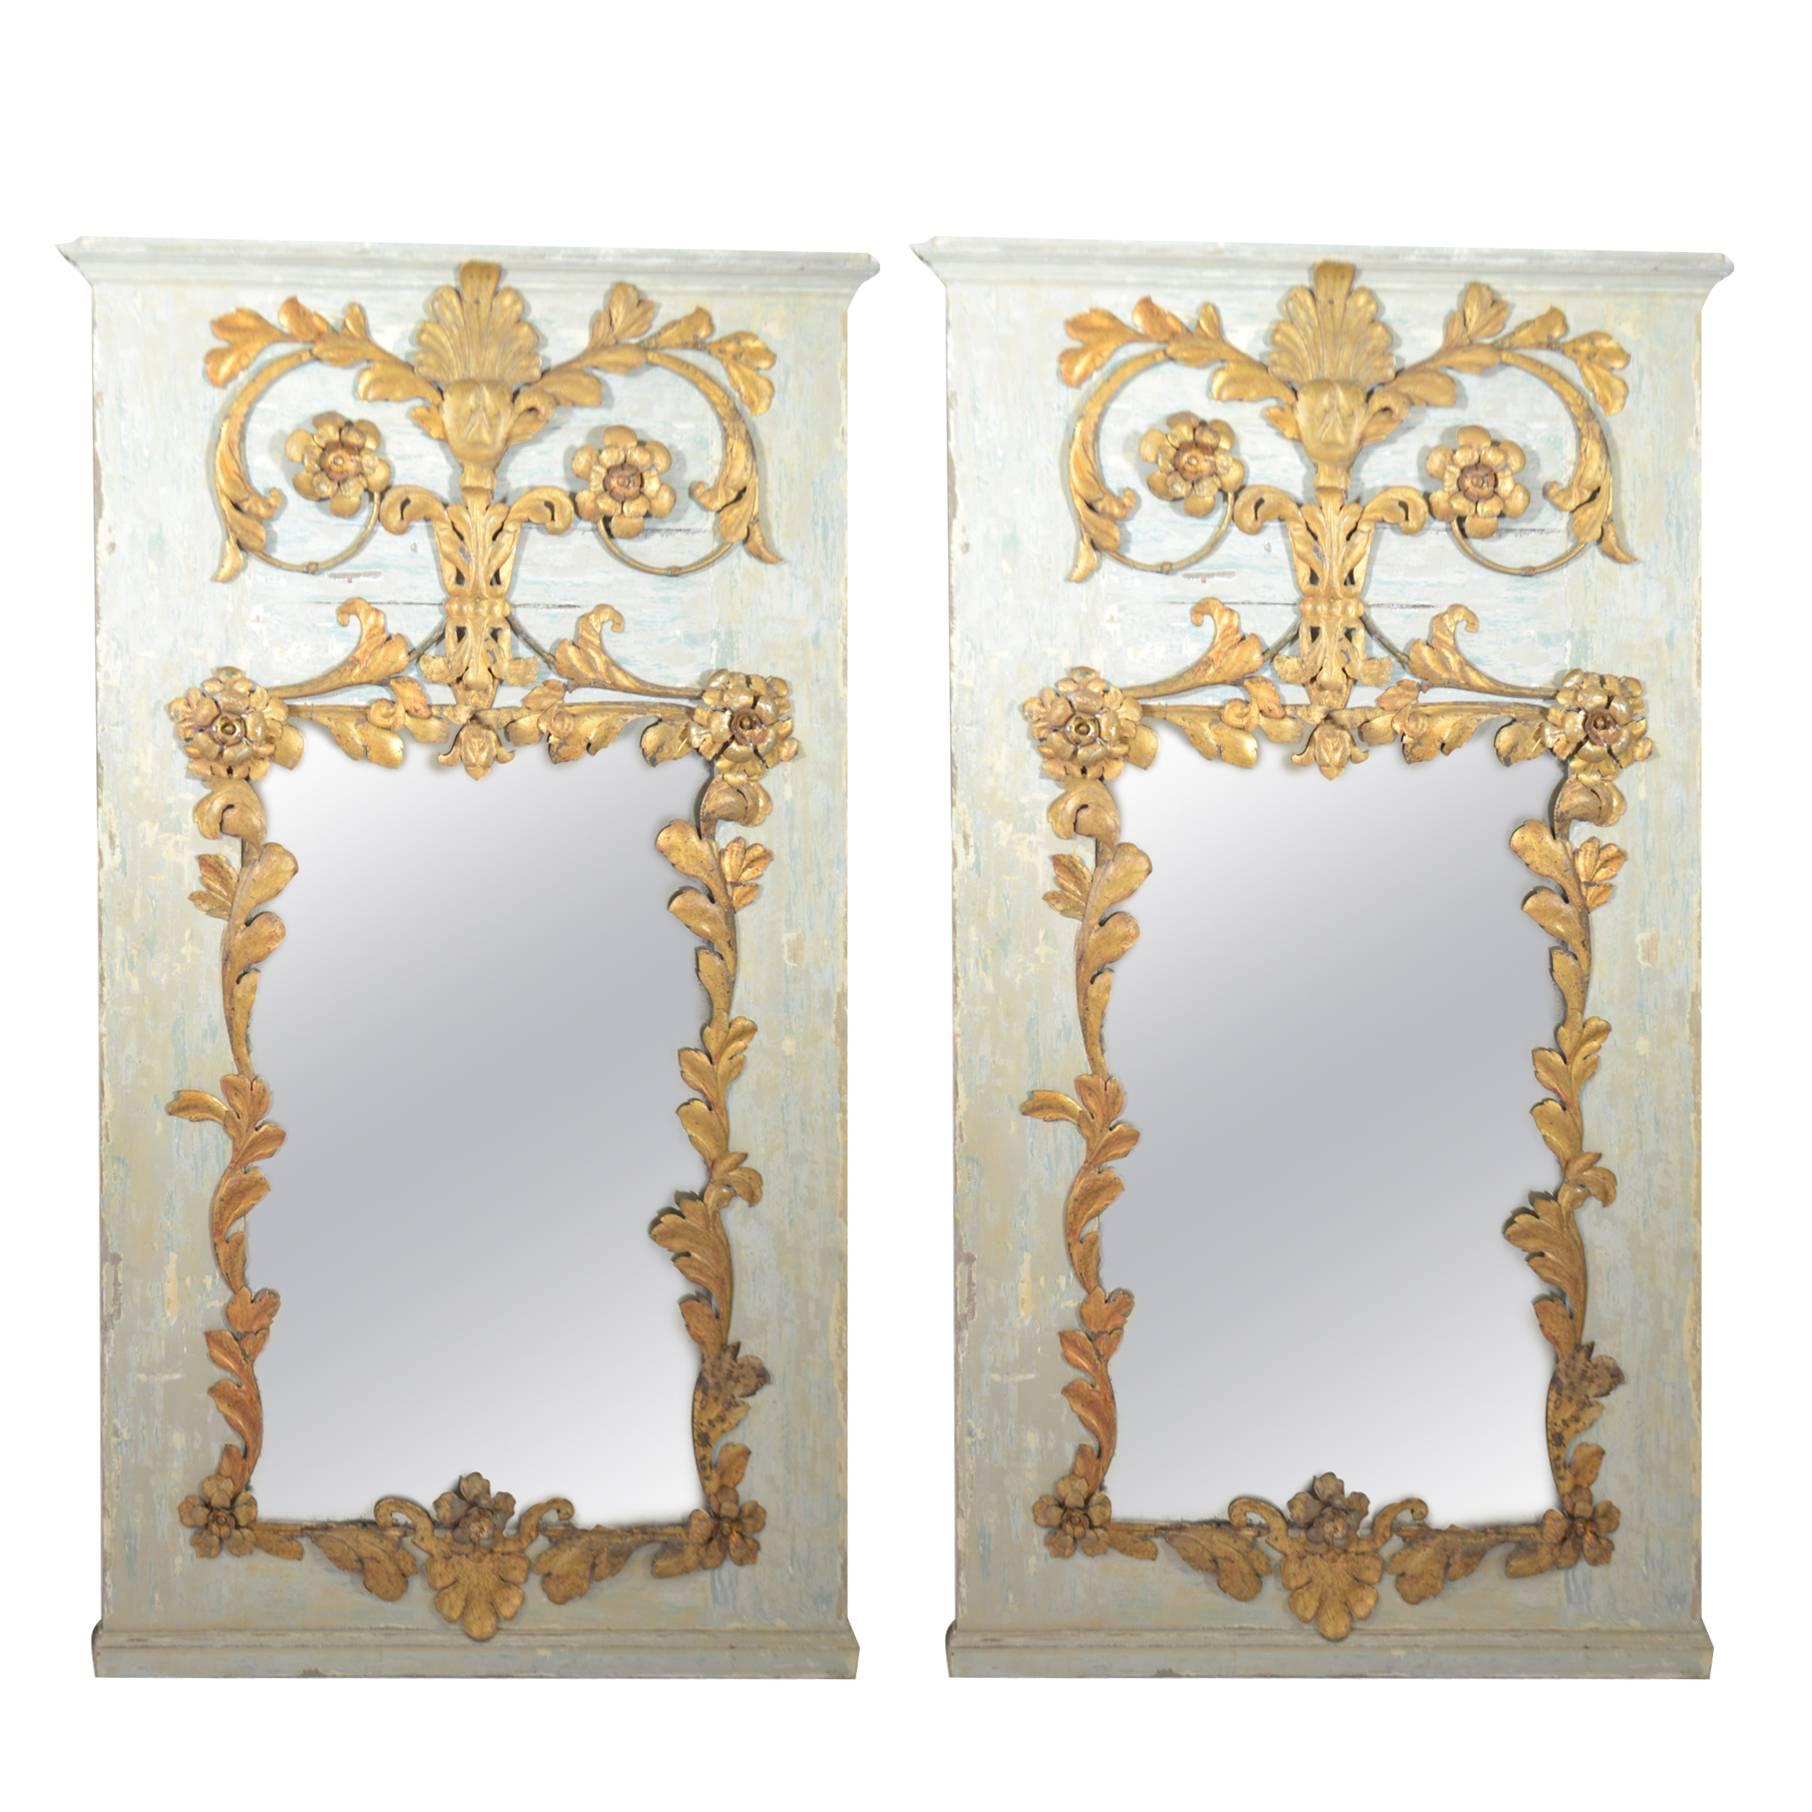  Pair of Venetian Mirrors, Assembled with 18th century elements